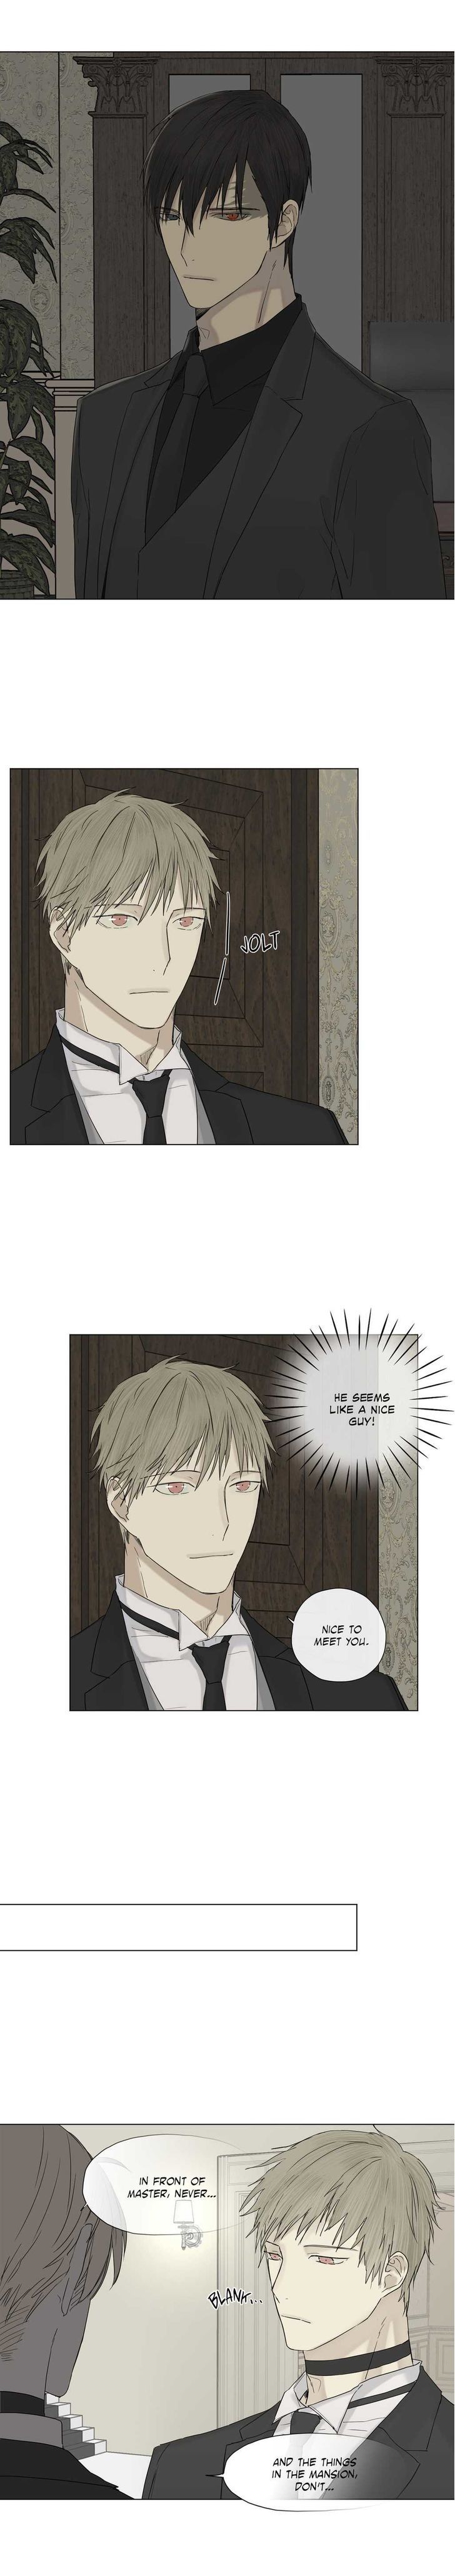 Royal Servant - Chapter 7 Page 20